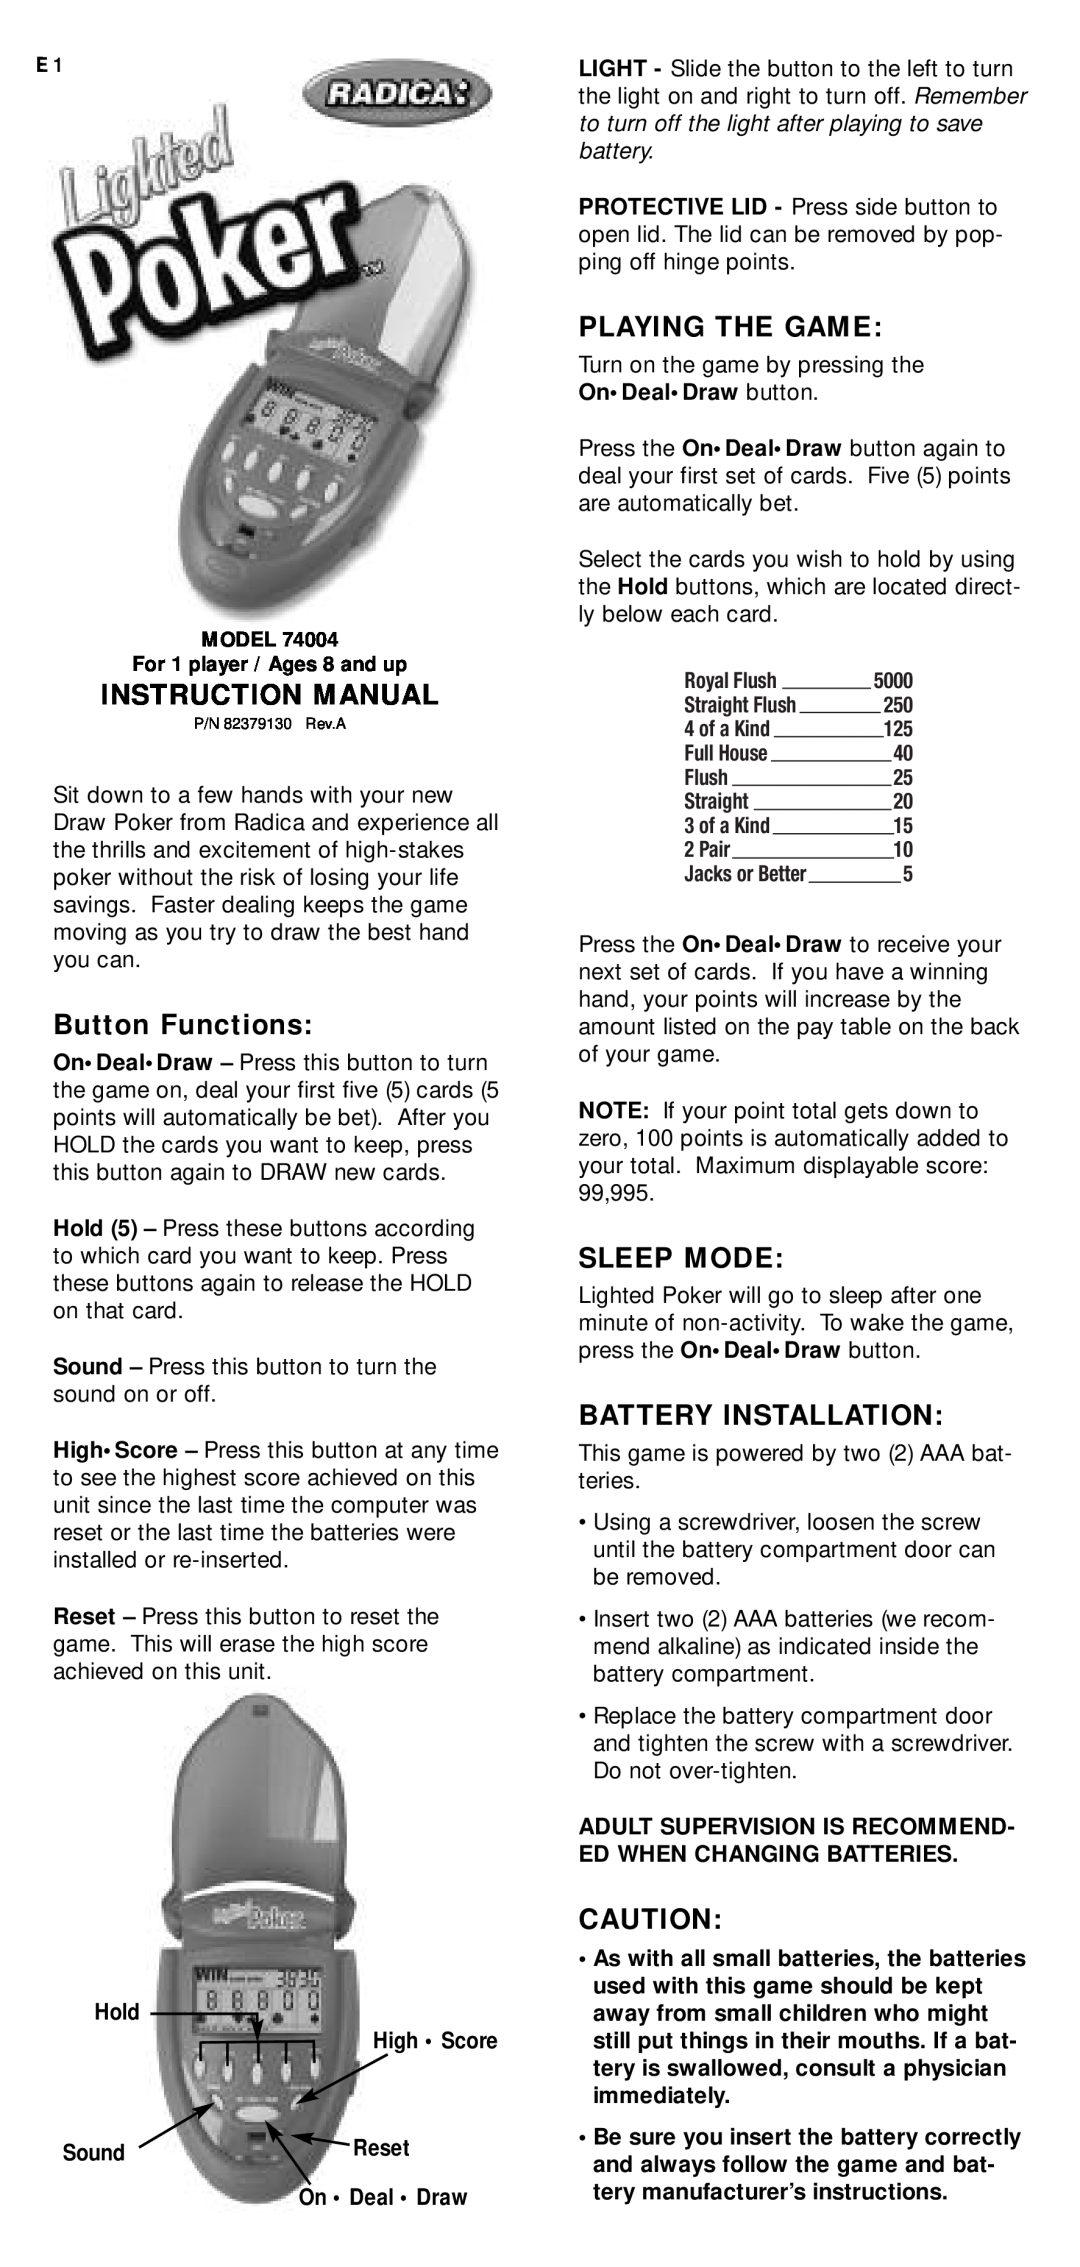 Radica Games 74004 instruction manual Instruction Manual, Button Functions, Playing The Game, Sleep Mode 